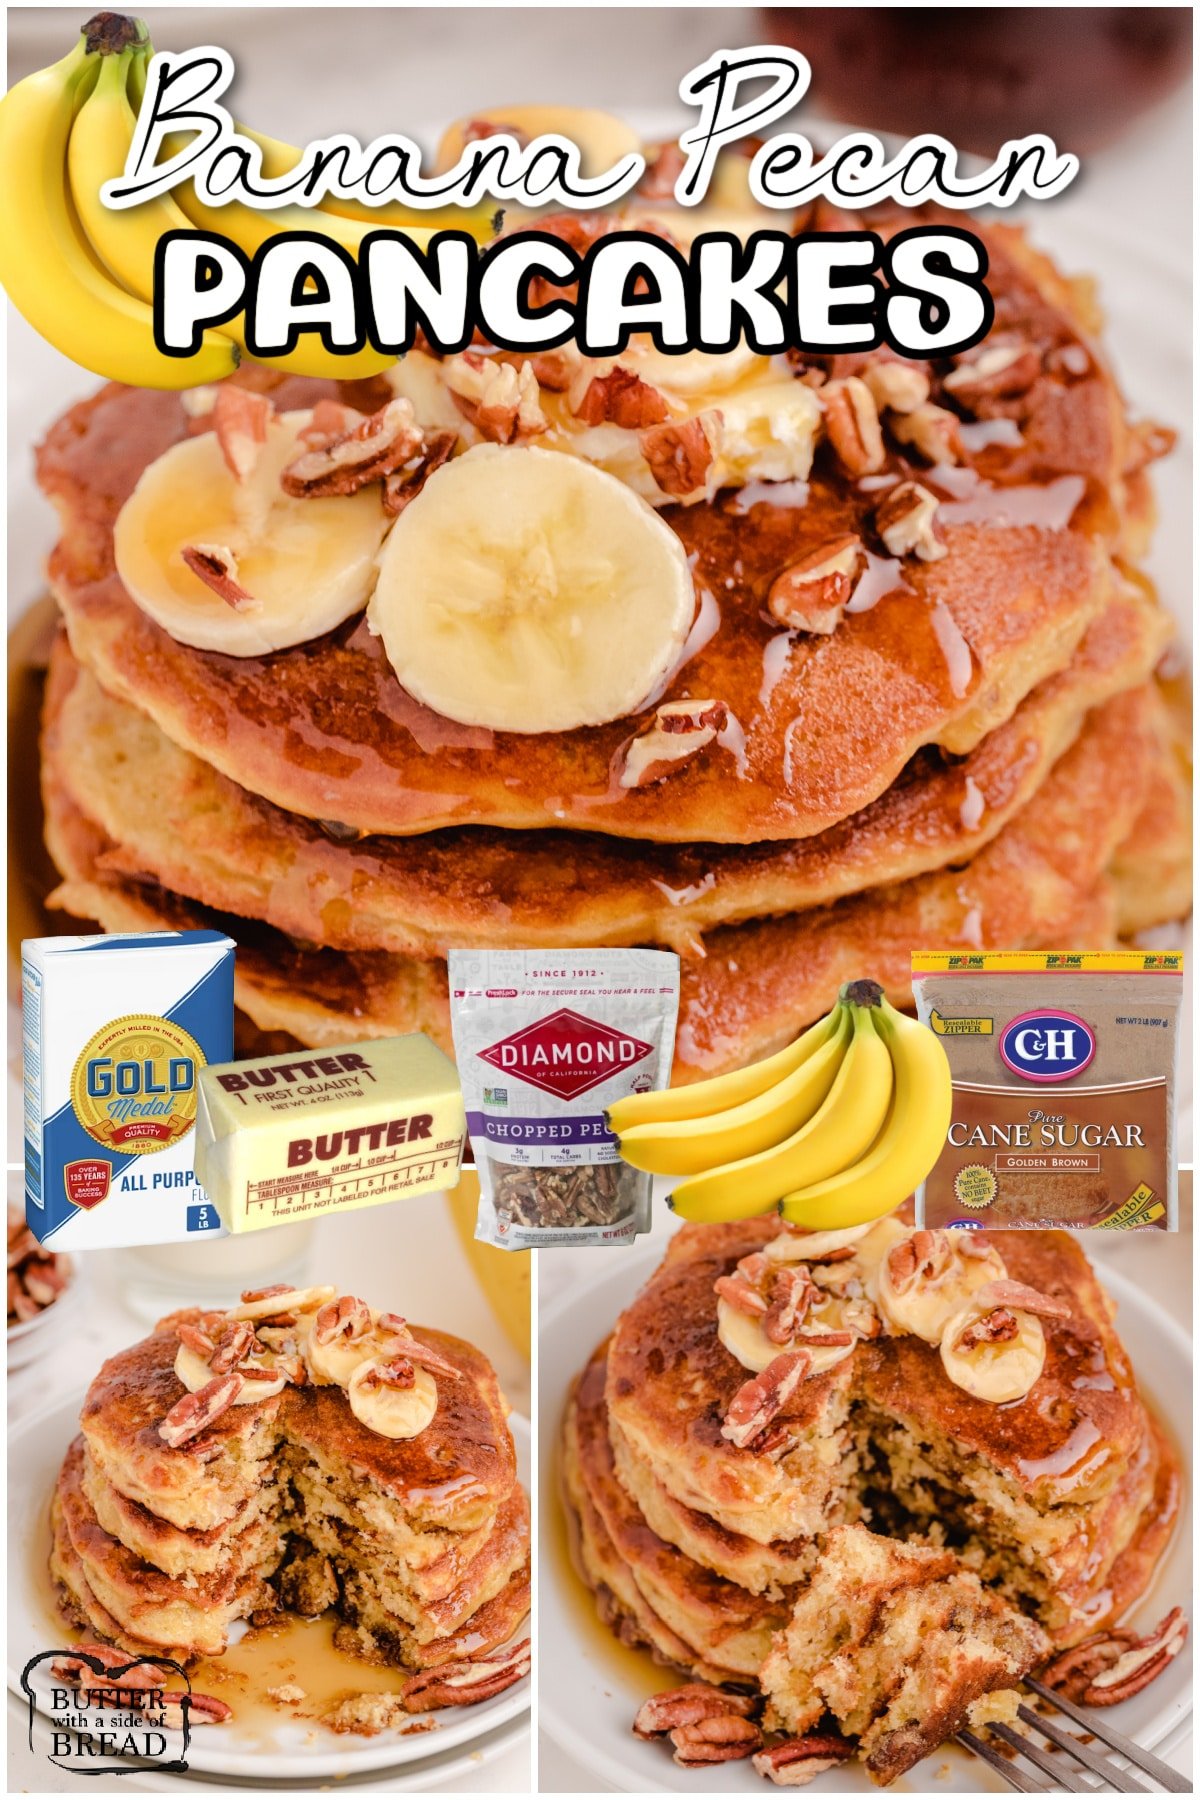 Banana Pecan Pancakes made with classic ingredients, adding banana and pecan for great flavor & texture! Homemade banana pancakes recipe with tips on how to make them light & fluffy!